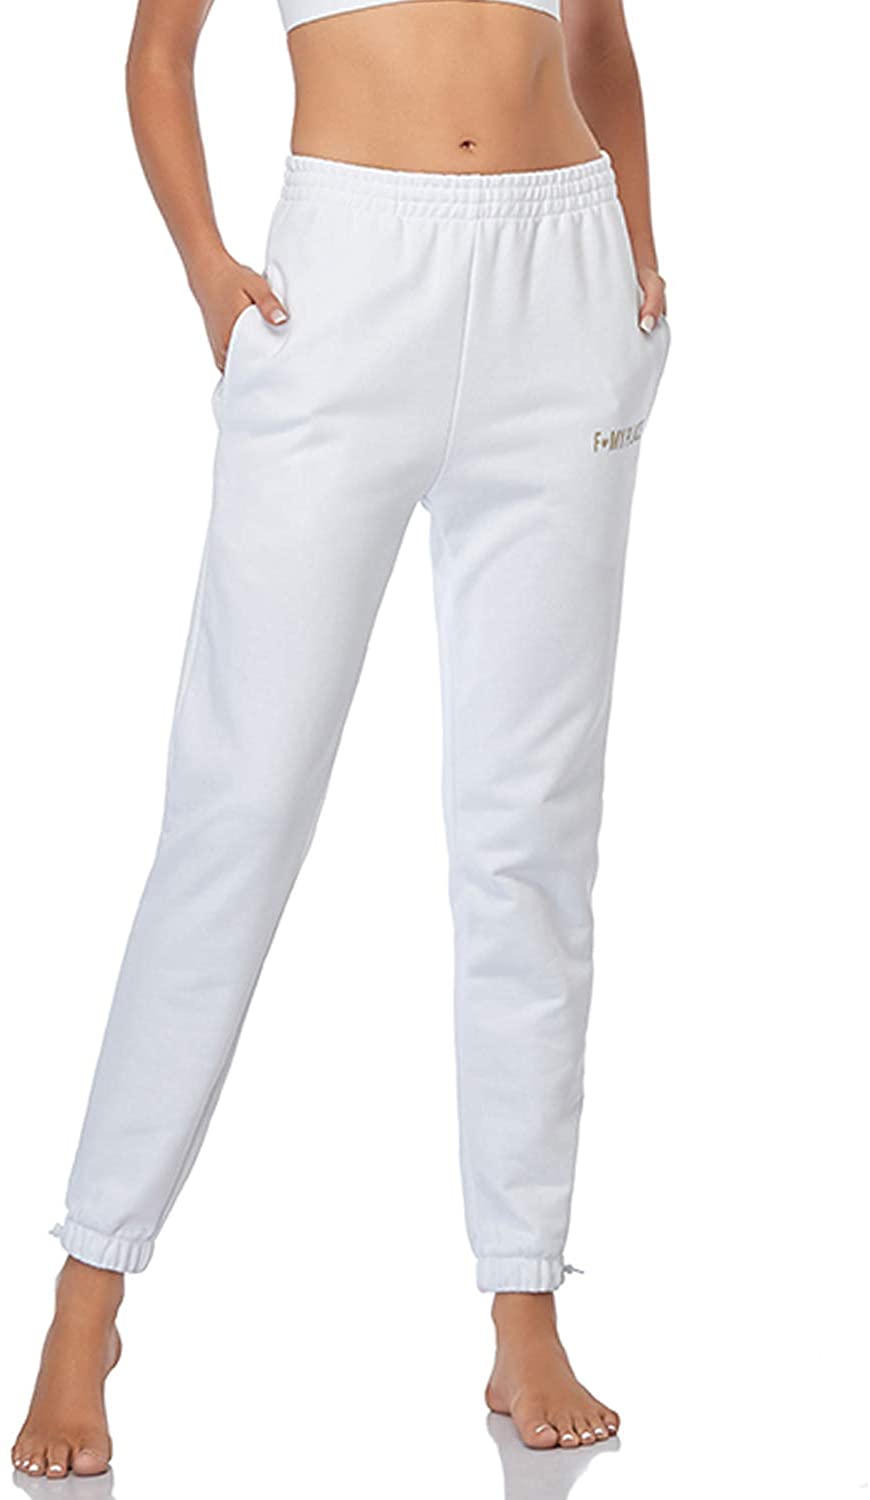 Found My Place Women's White Sweatpants, Casual High Waisted, White ...